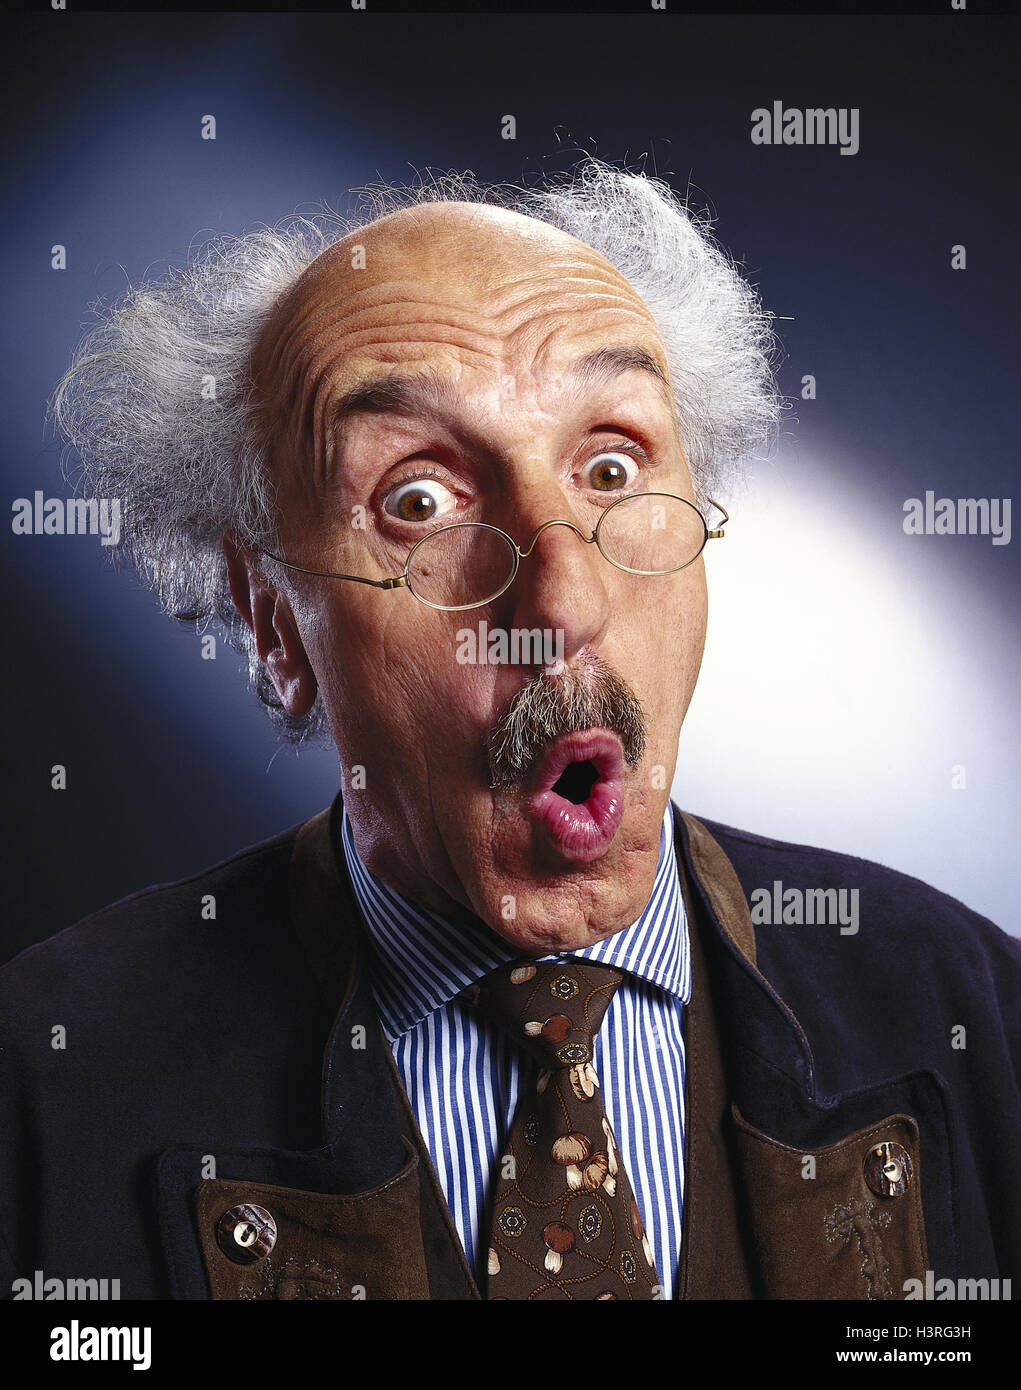 Senior, glasses, forehead bald head, facial play, is surprised, surprises, portrait, man, old, wearers glasses, reading glasses, visual help, expression, astonished, surprise, surprises, surprise, amazed, inside Stock Photo